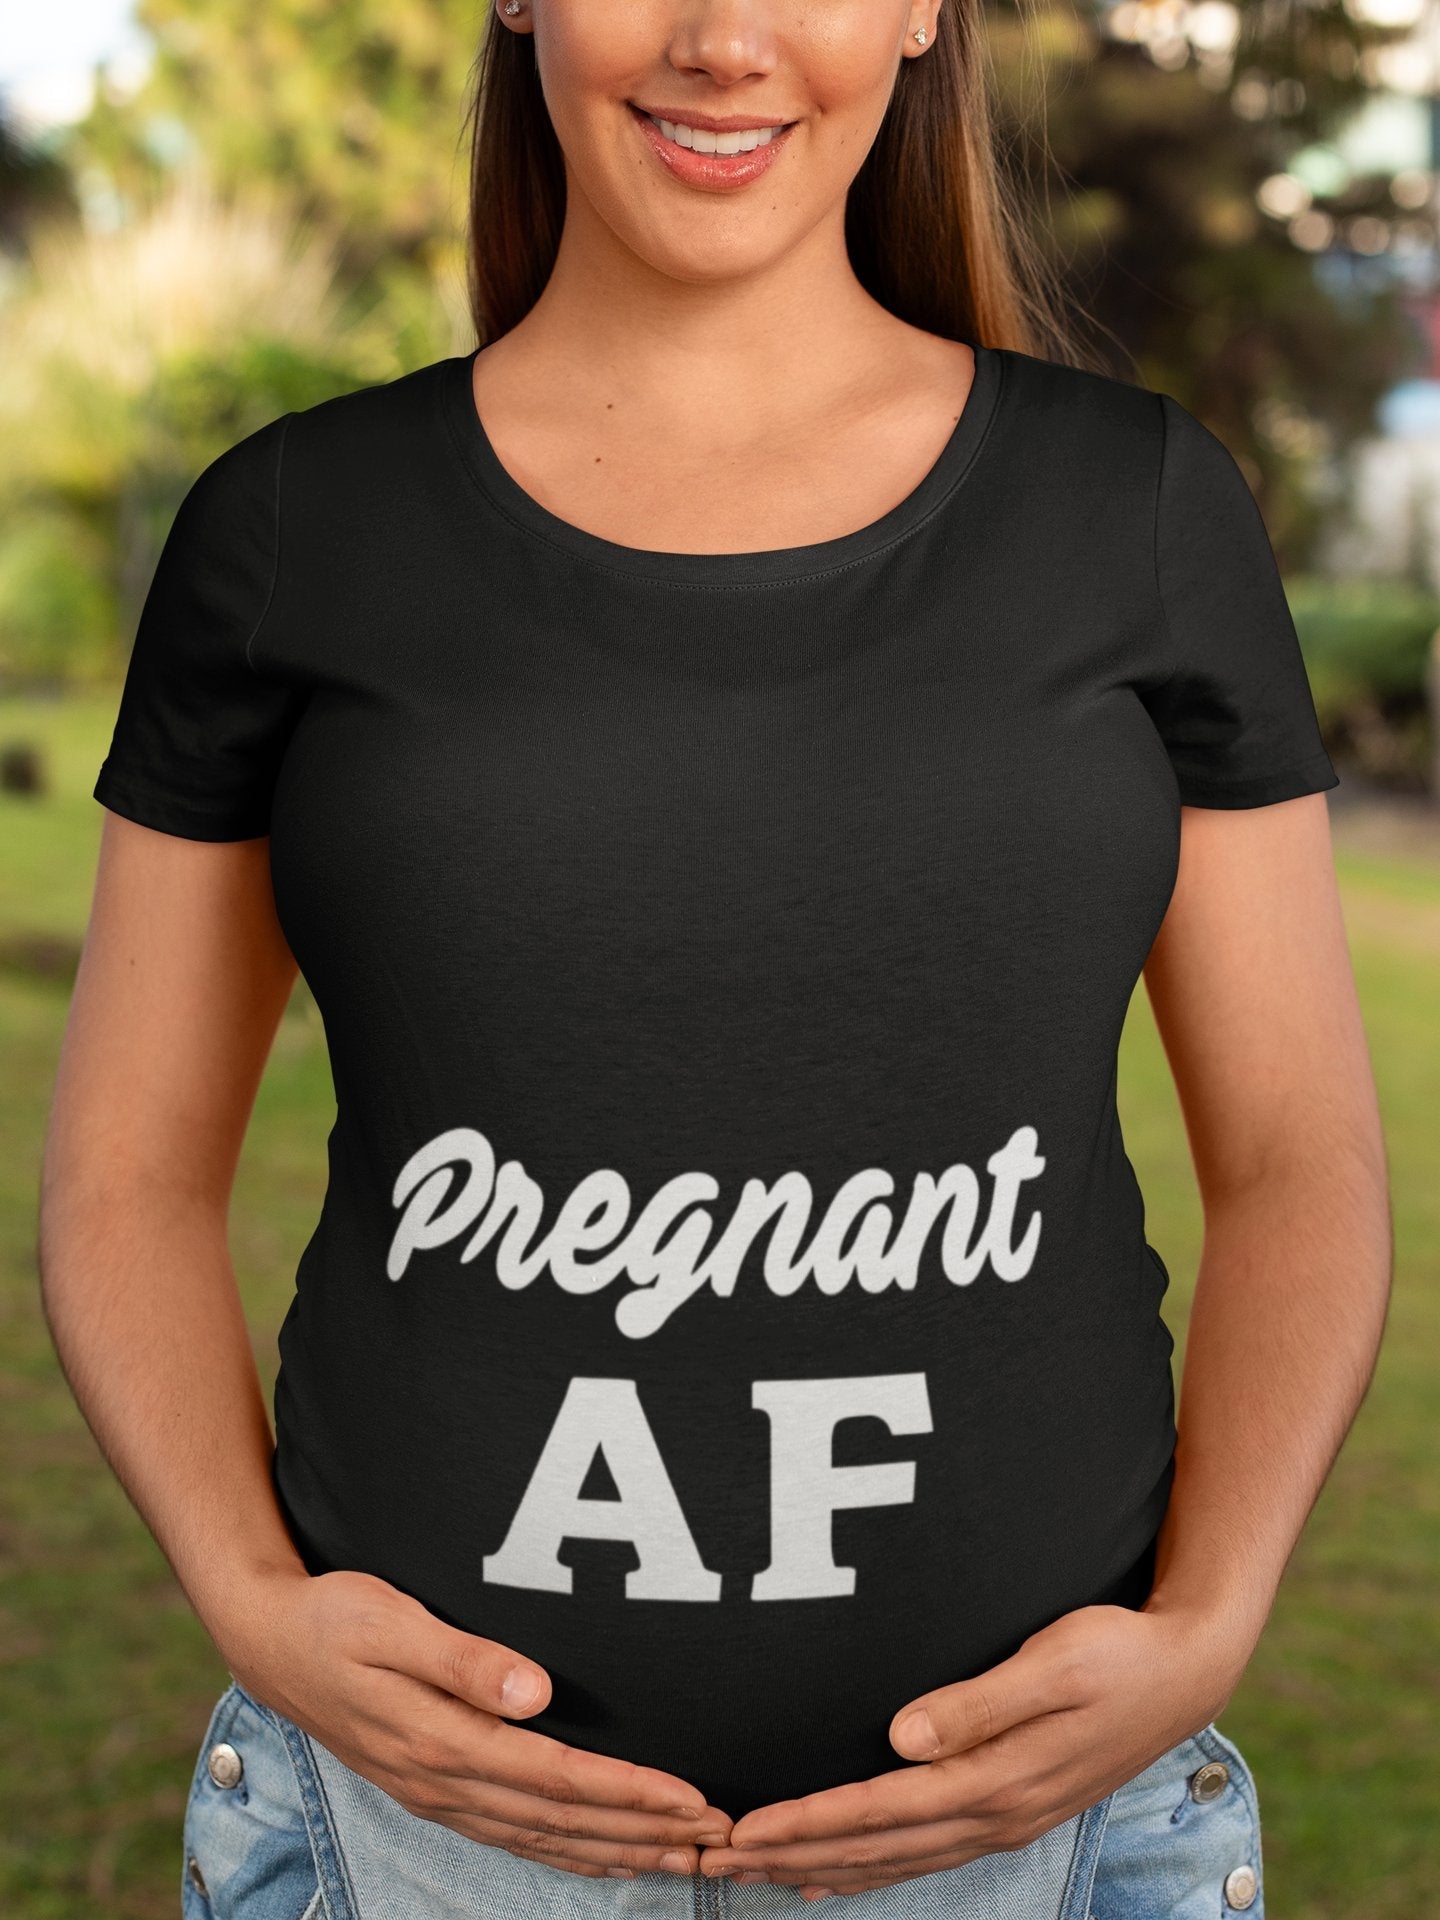 thelegalgang,Pregnant AF Funny Maternity T shirt,WOMEN.